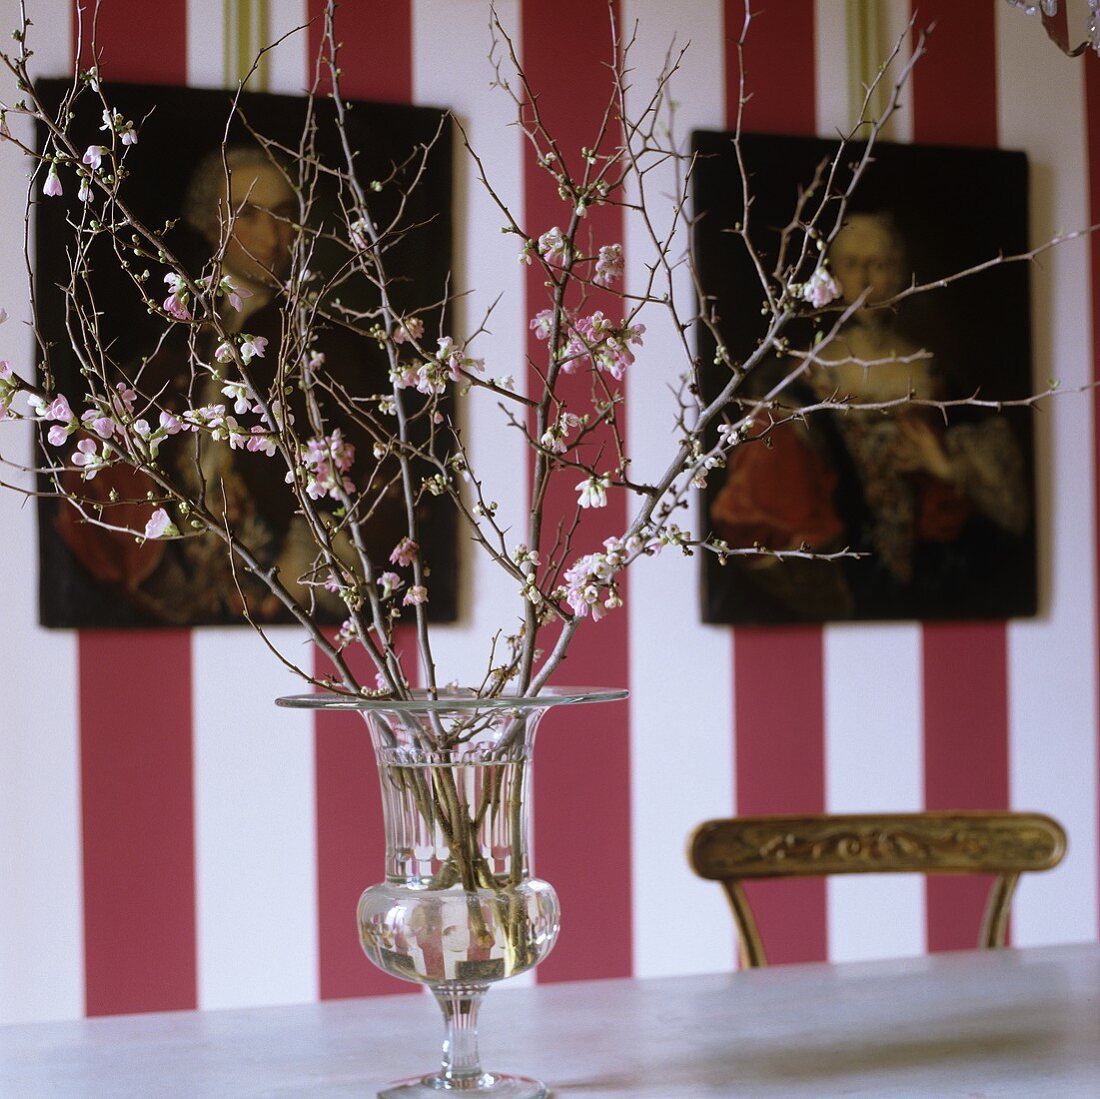 A flowering sprig in a glass vase in front of a red and white striped wall hung with pictures